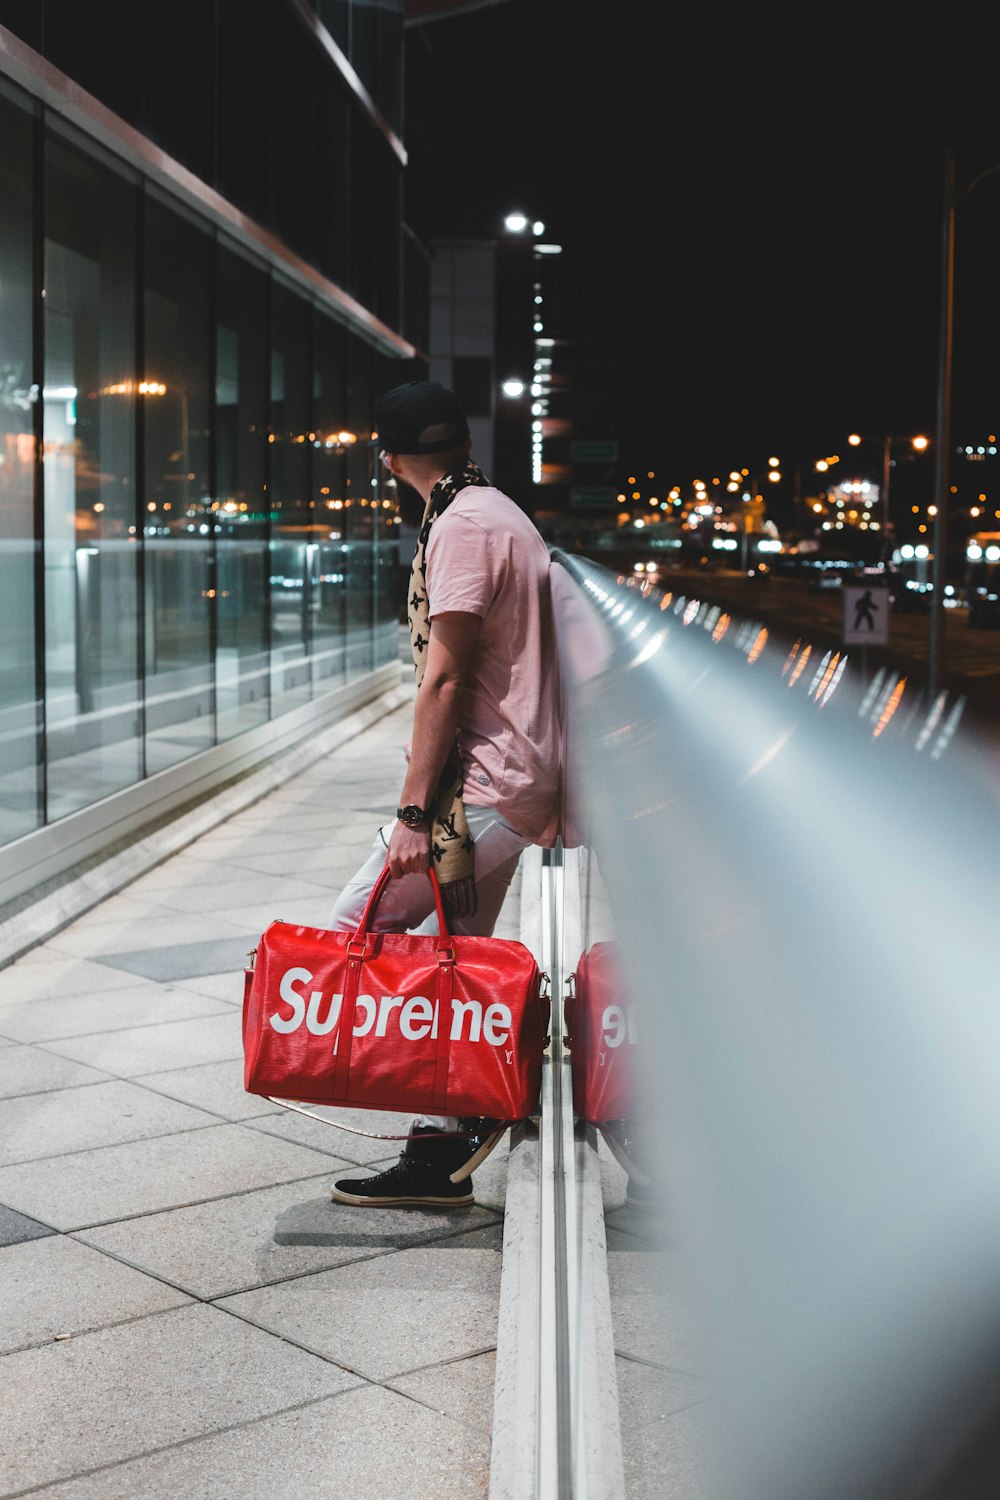 Man in pink shirt with red Supreme bag in hand walks towards building photo  – Free Clothing Image on Unsplash